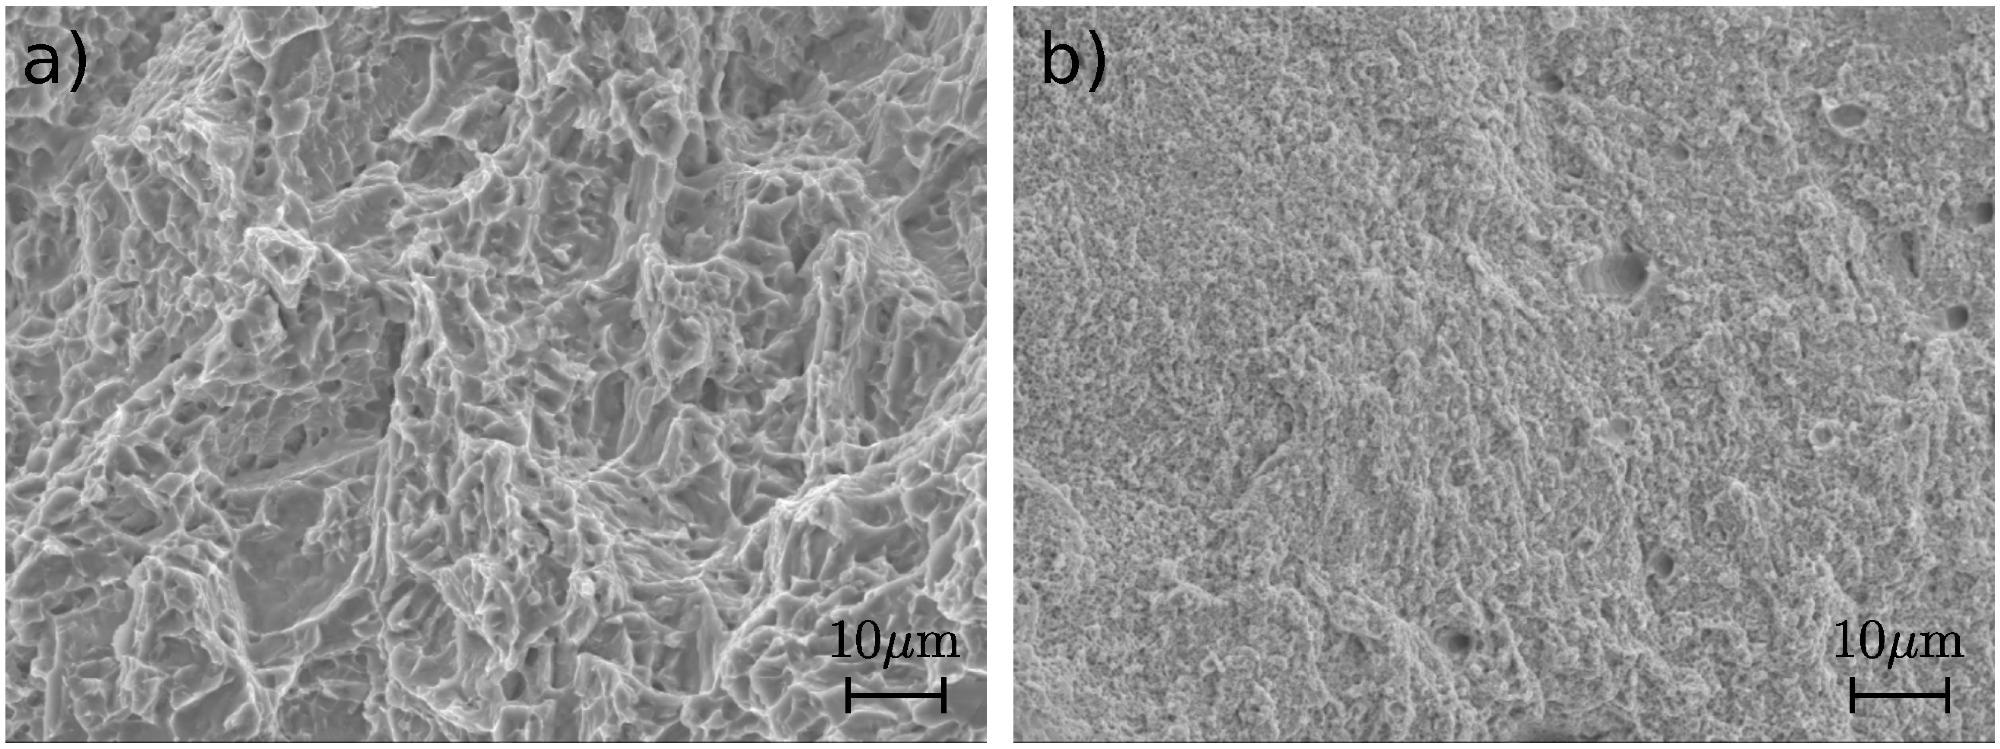 Micrographs of fracture surfaces of the specimens after tensile test made of (a) titanium alloy Ti6Al4V and (b) stainless steel 316L.